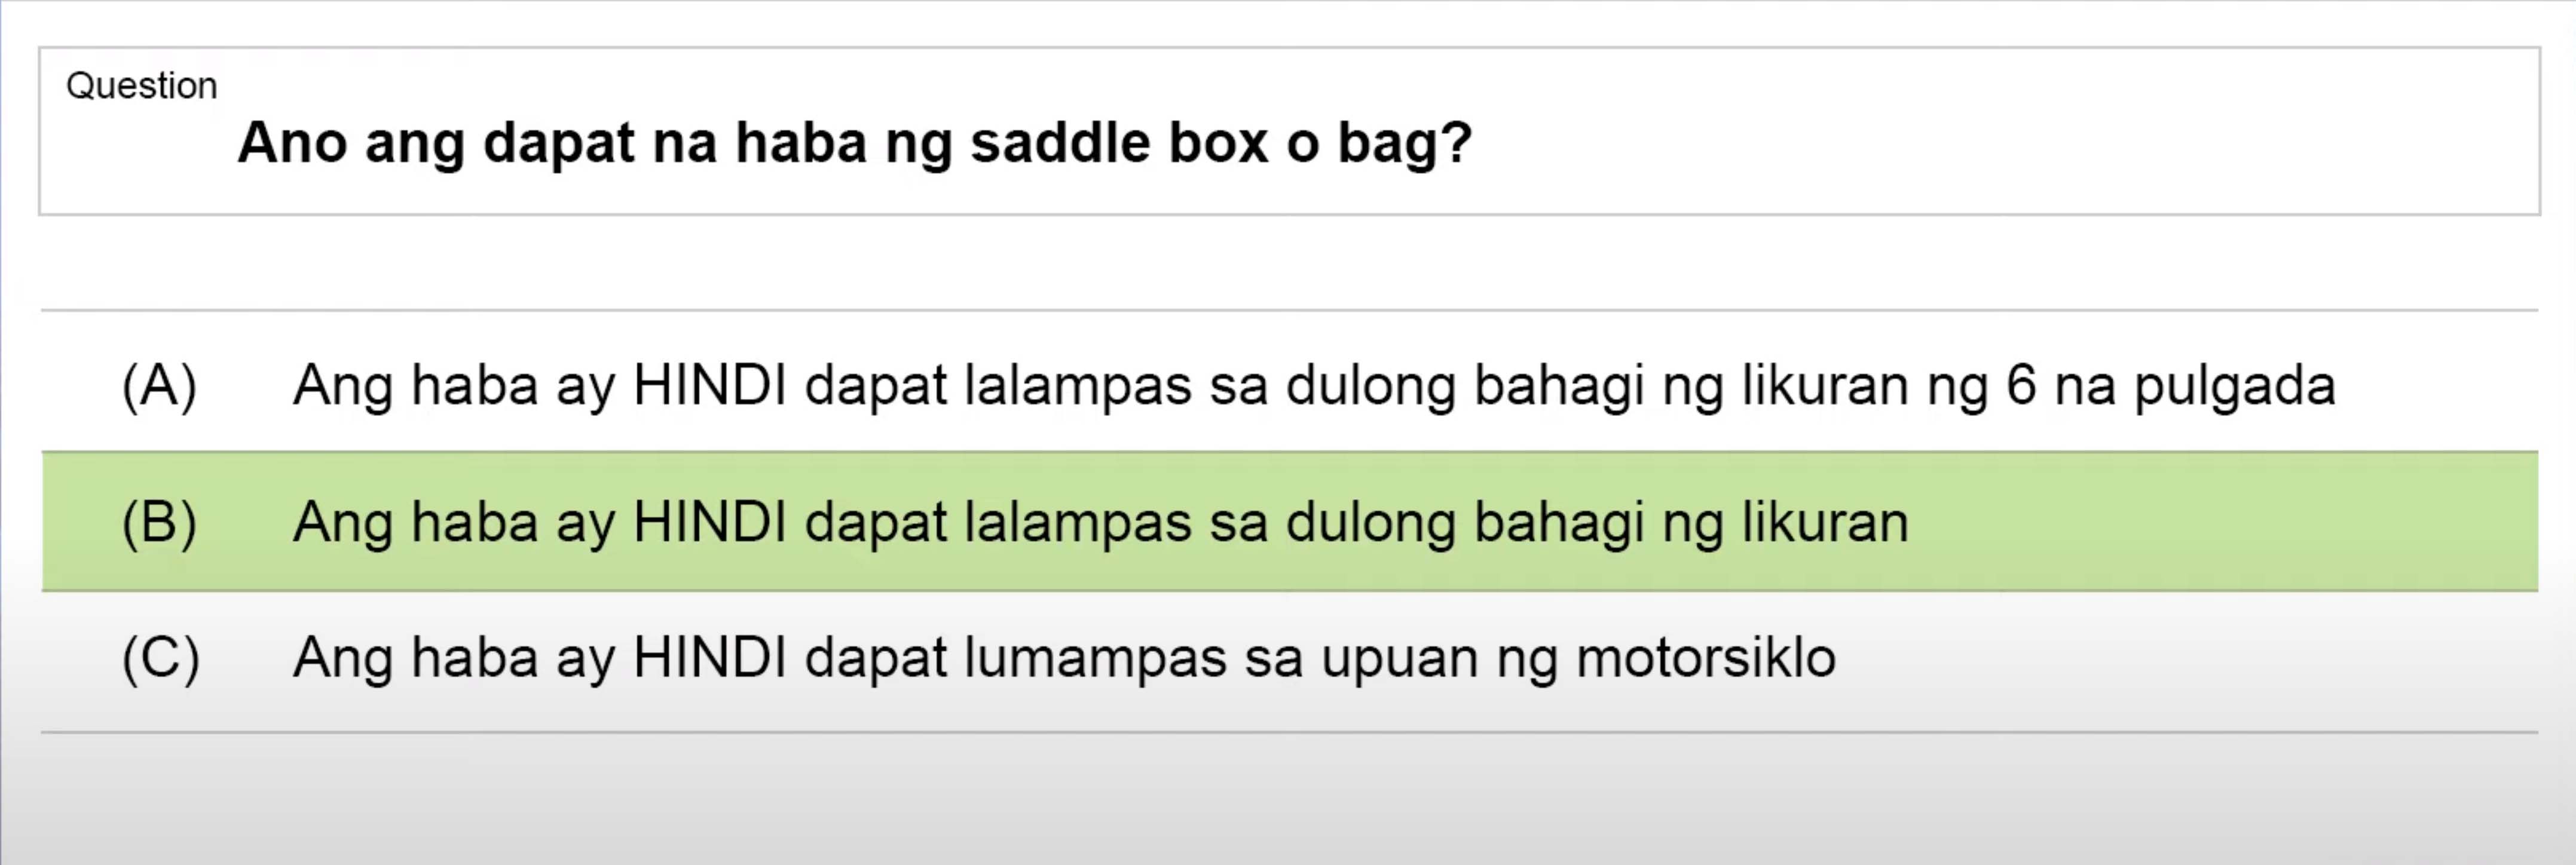 LTO Tagalog non pro exam reviewer motorcycle (32)